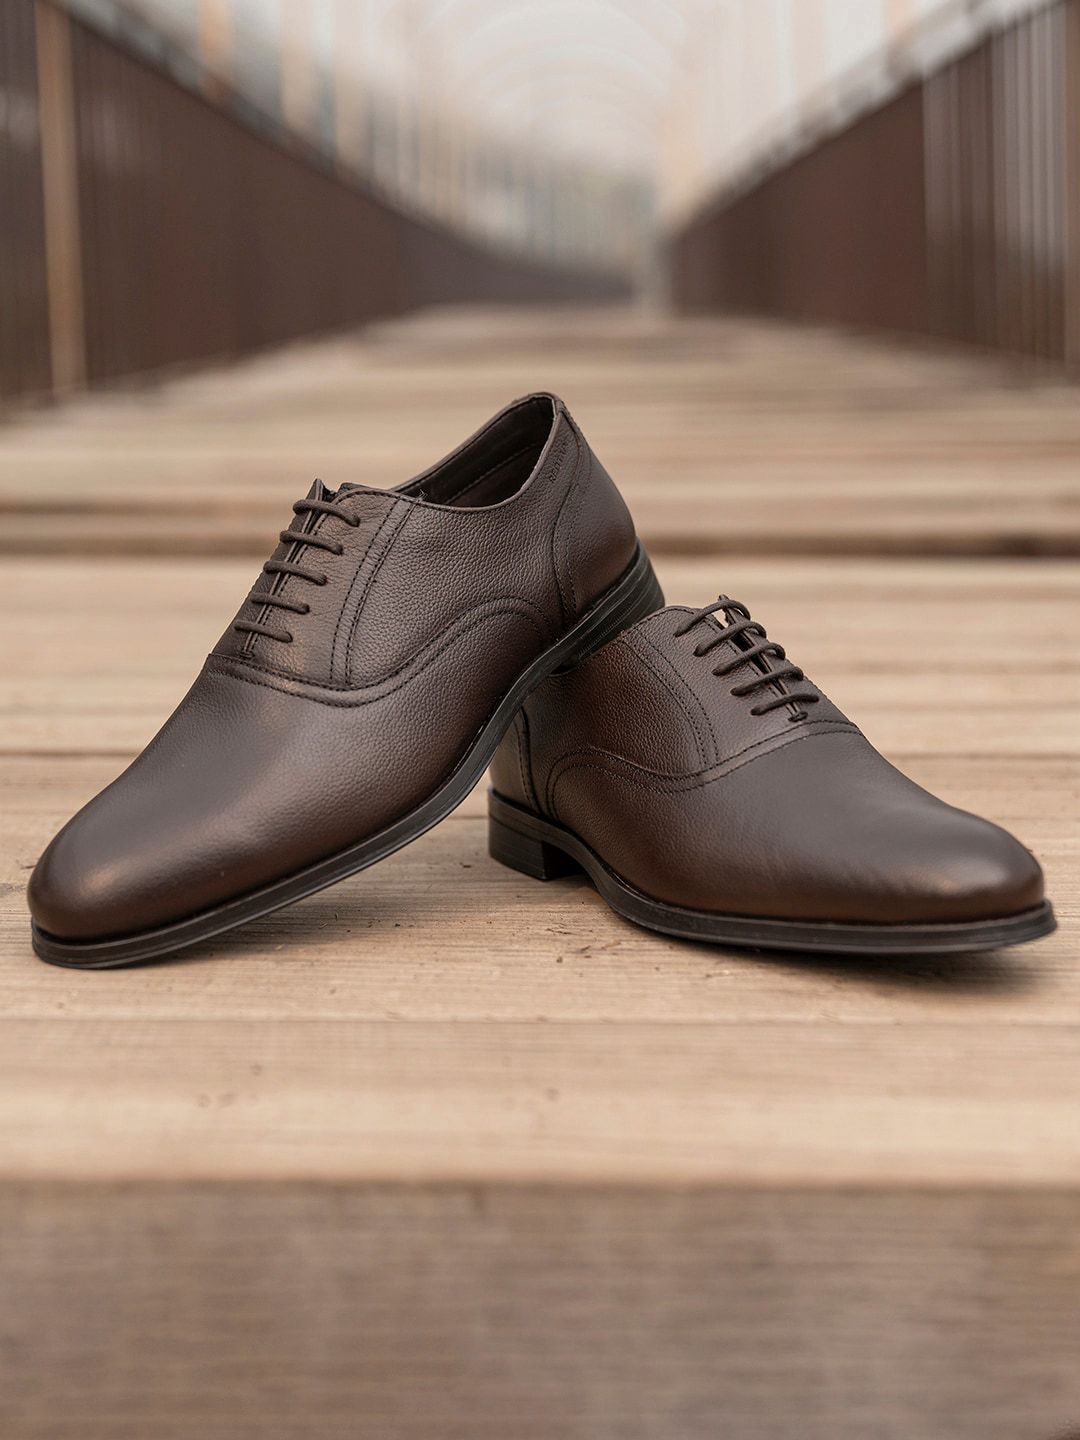 Red Tape Men Textured Anti-Slip Ground Support Leather Formal Oxfords